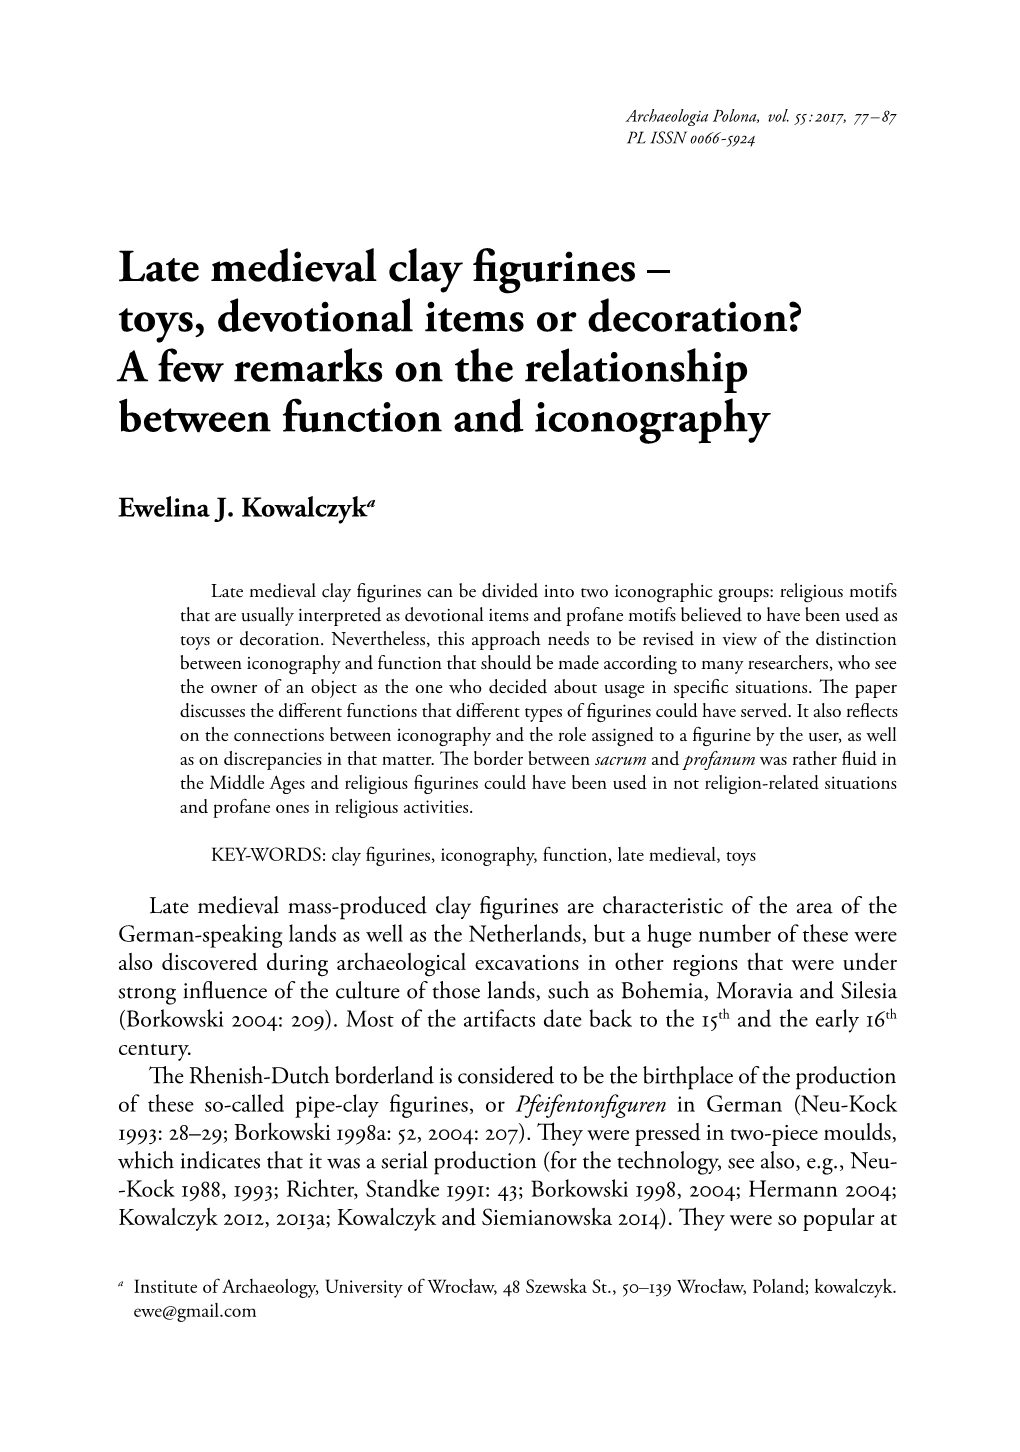 Late Medieval Clay Figurines – Toys, Devotional Items Or Decoration? a Few Remarks on the Relationship Between Function and Iconography